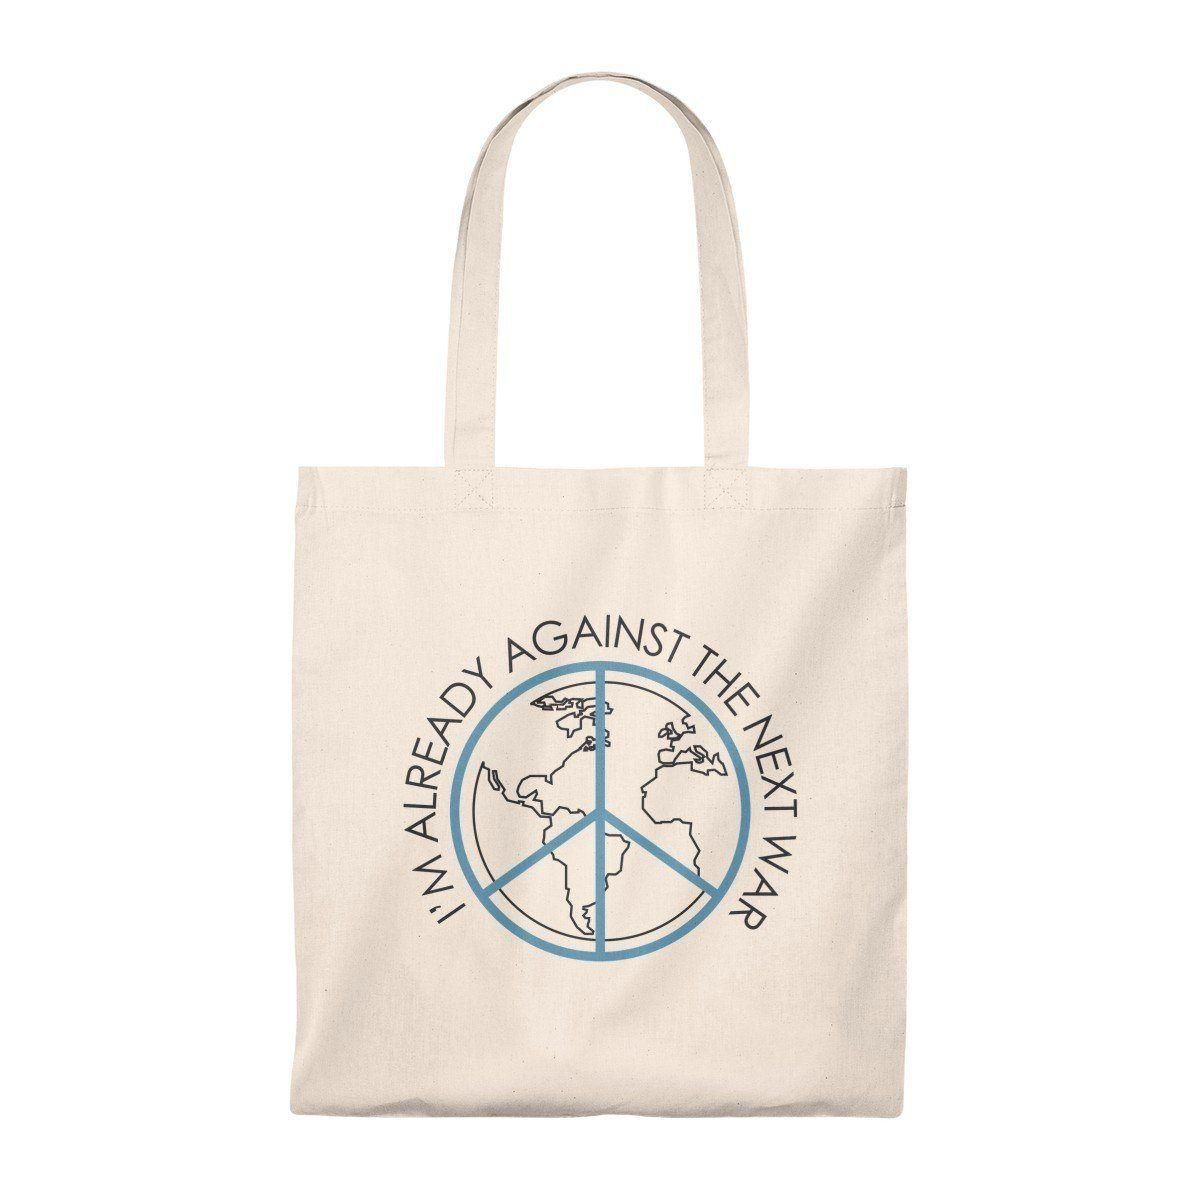 I'M Ready Against Next War Peace Sign Printed Tote Bag